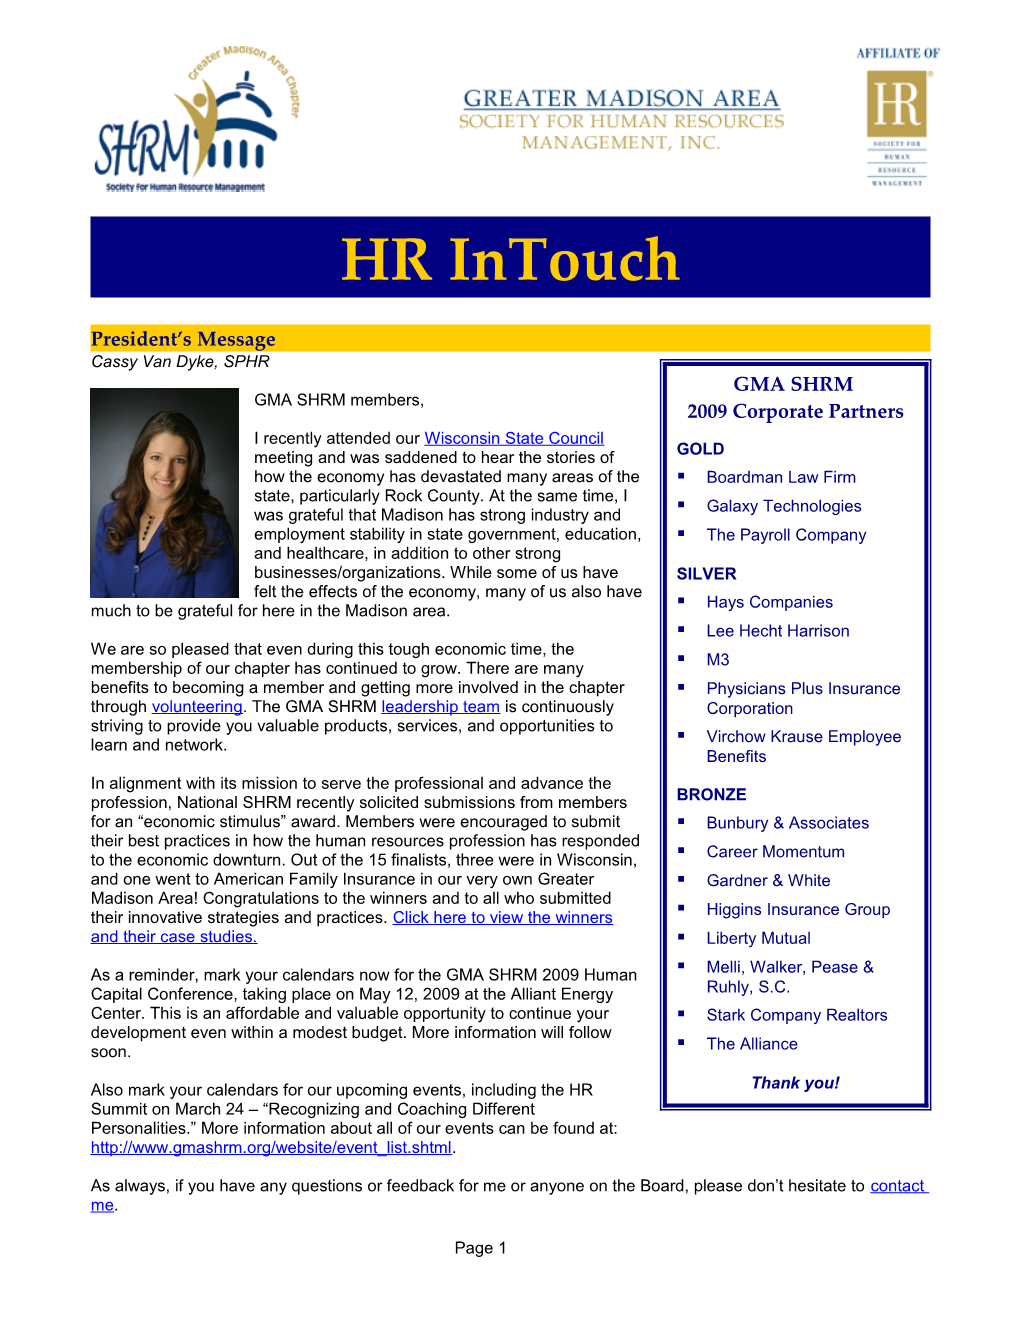 GMA SHRM Monthly Newsletter